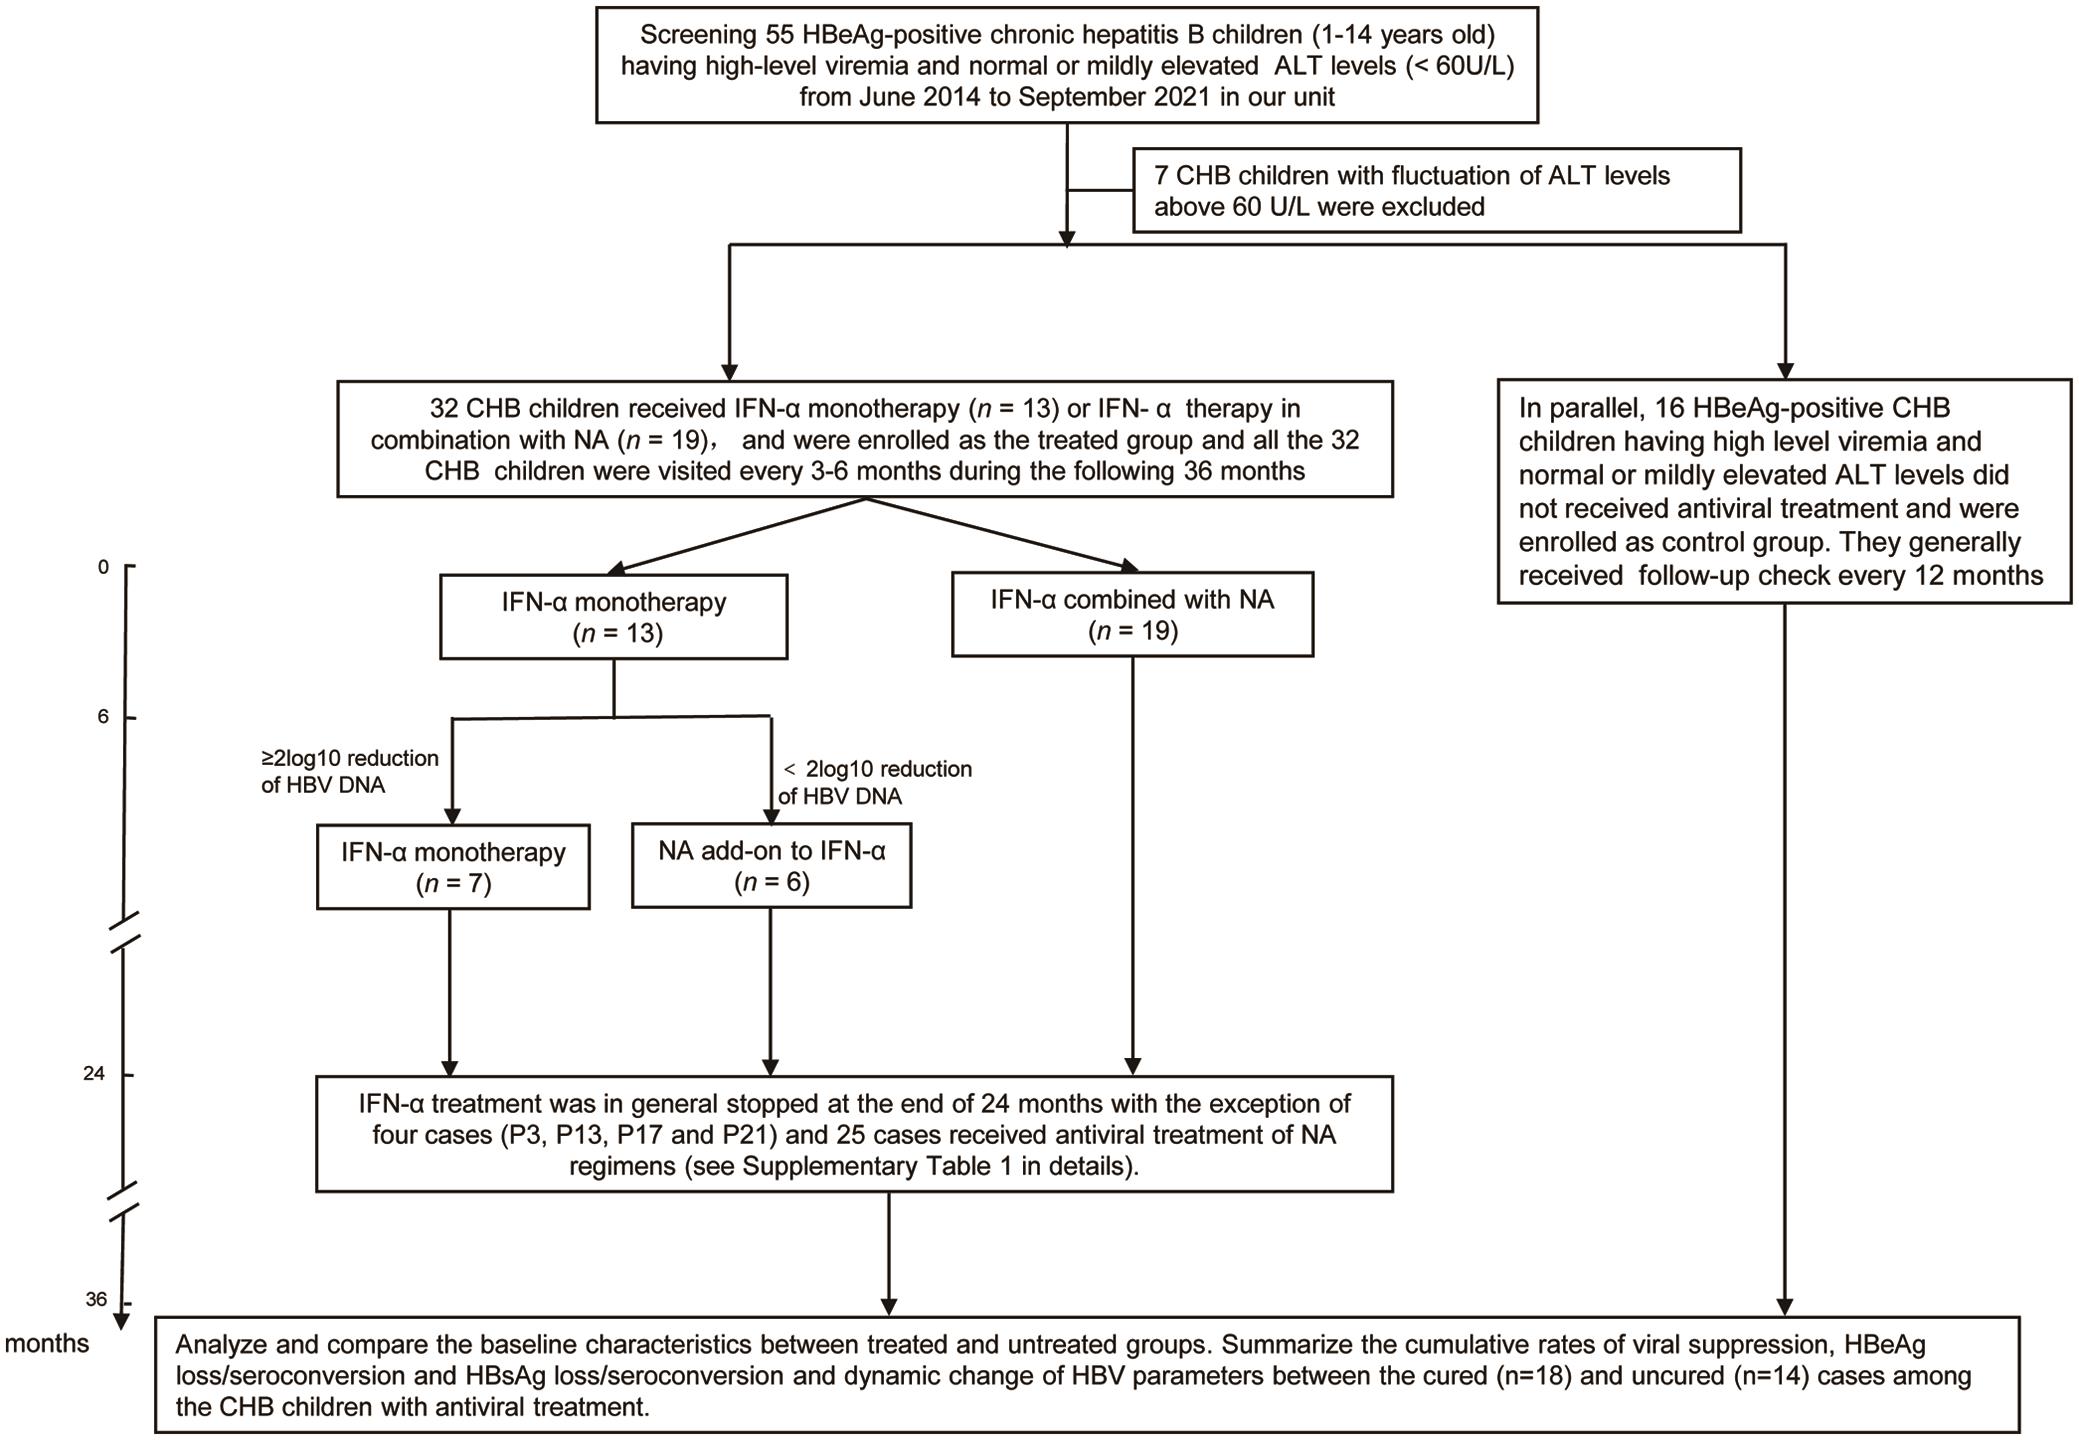 Flow diagram of antiviral course of treatment in children with CHB having high-level viremia and normal or mildly elevated serum ALT levels.